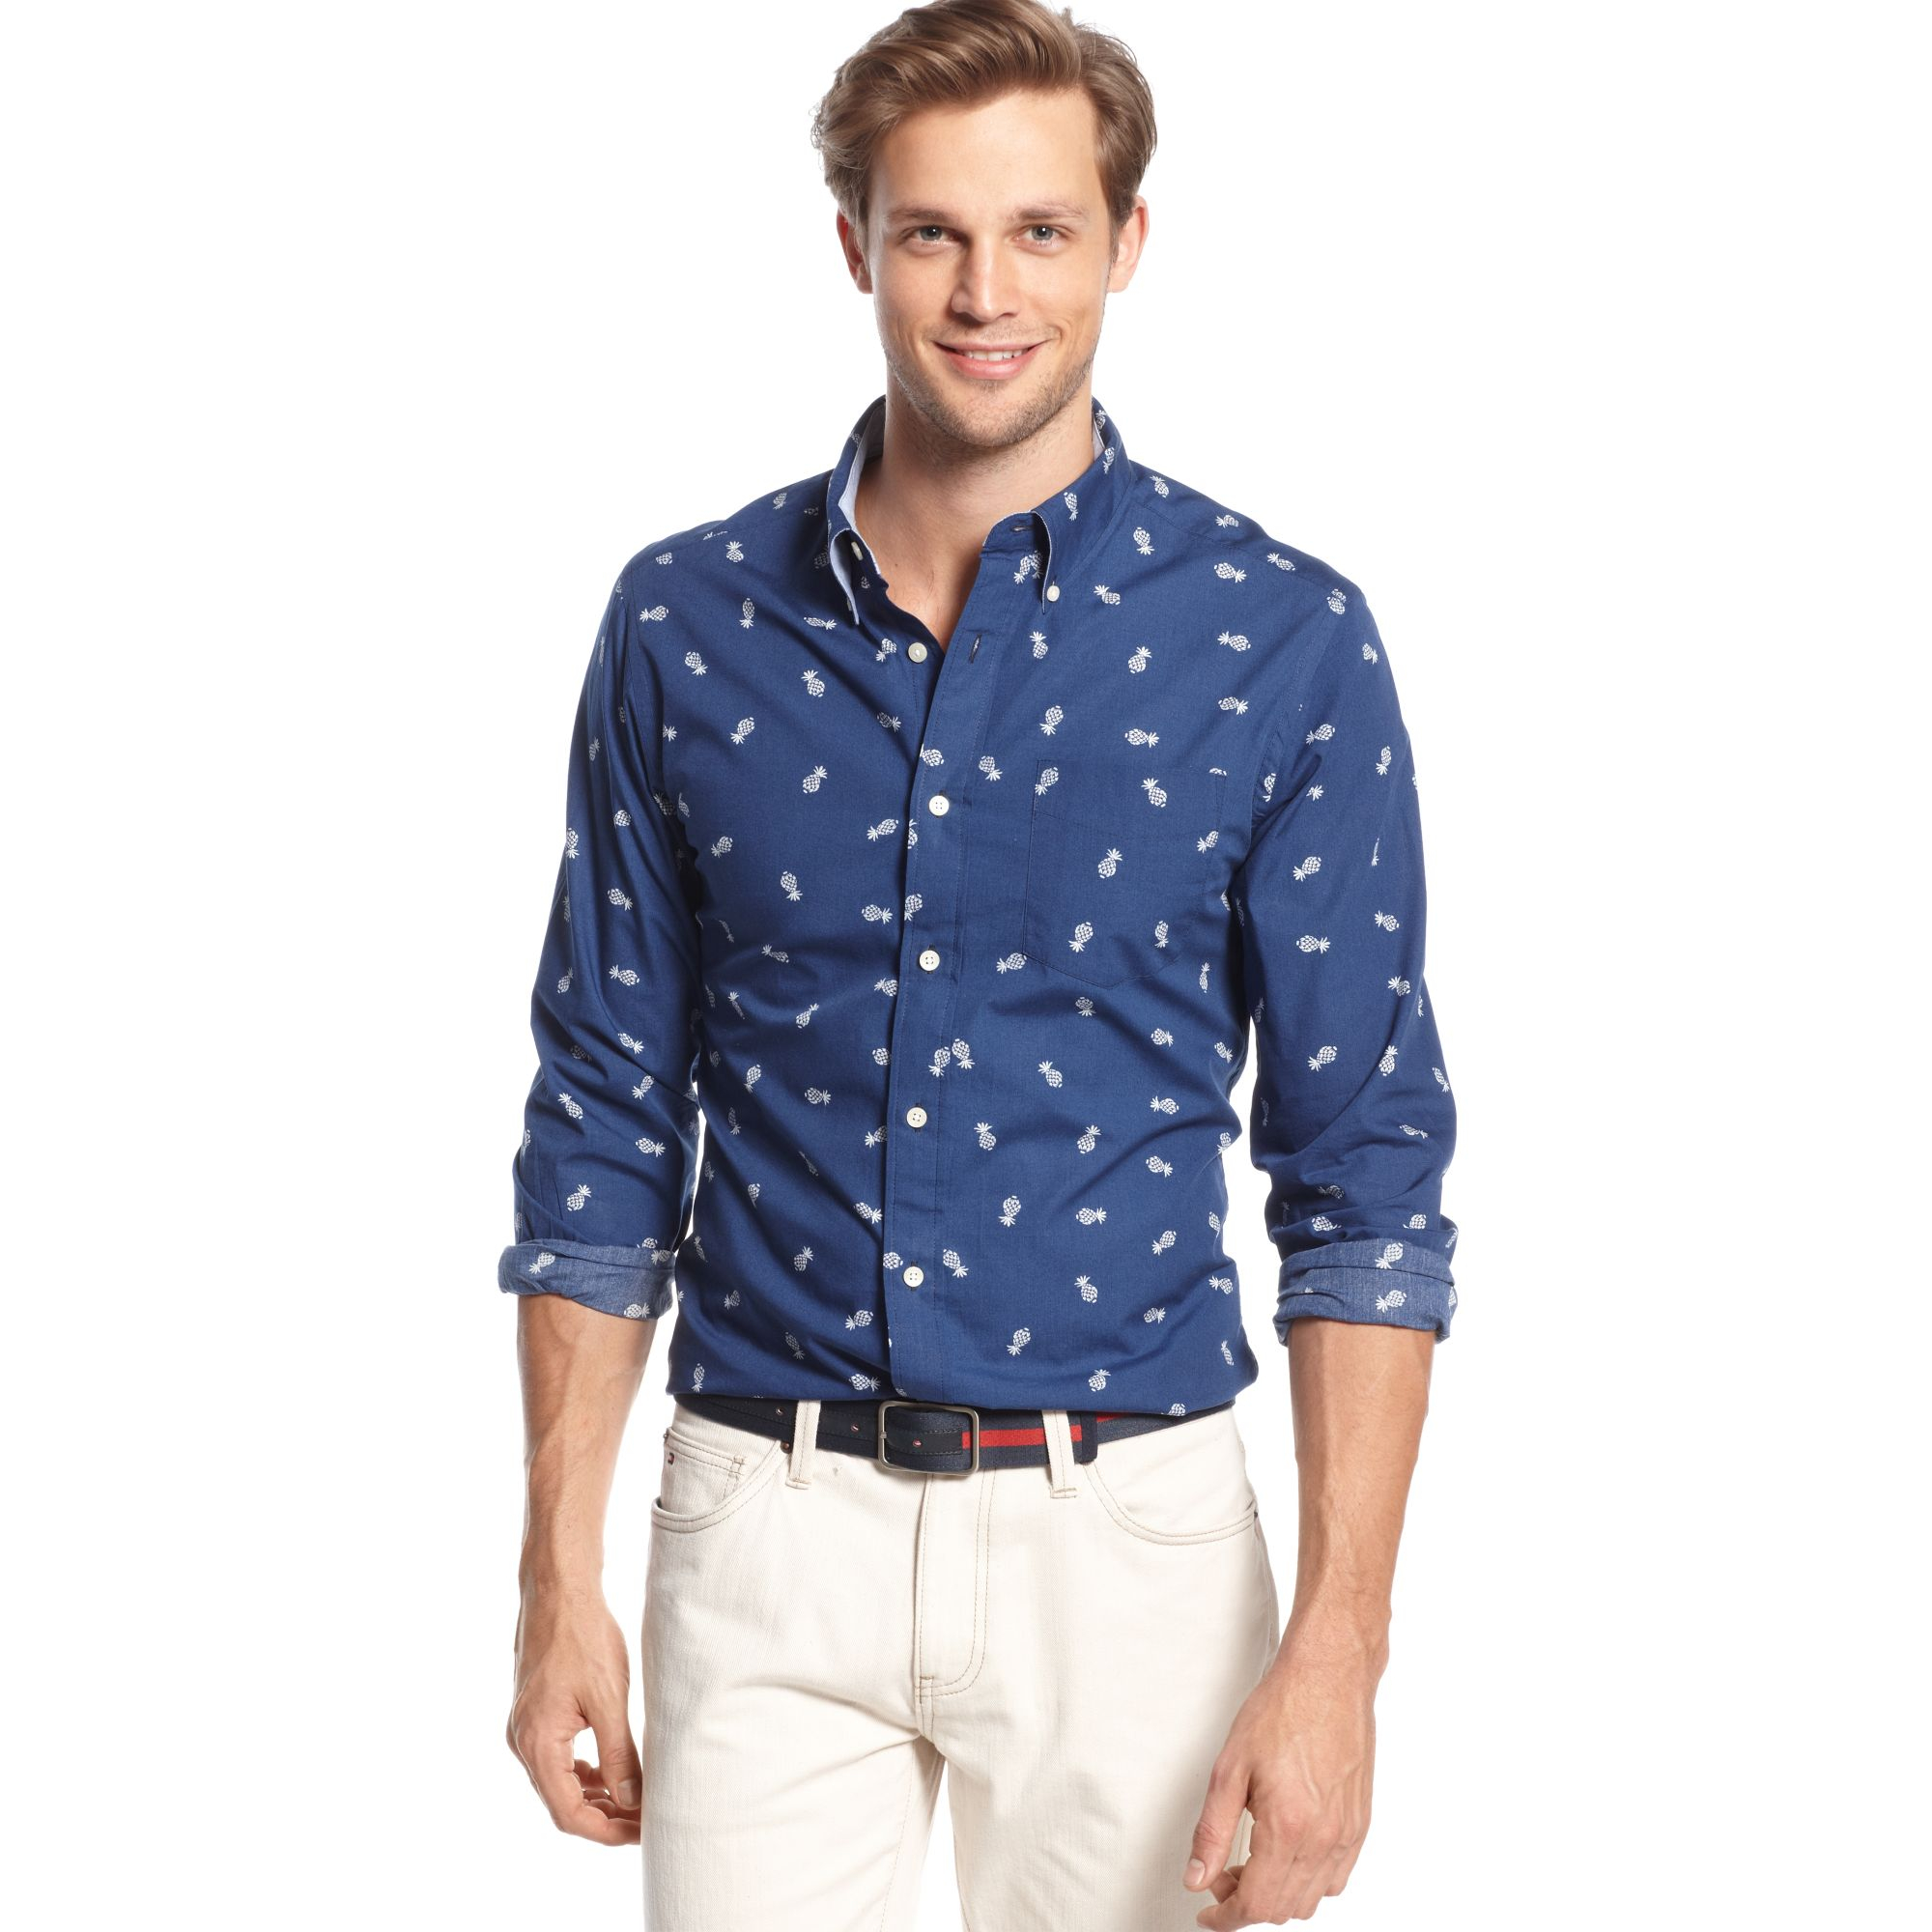 Tommy Hilfiger Pineapple Shirt in Blue ...